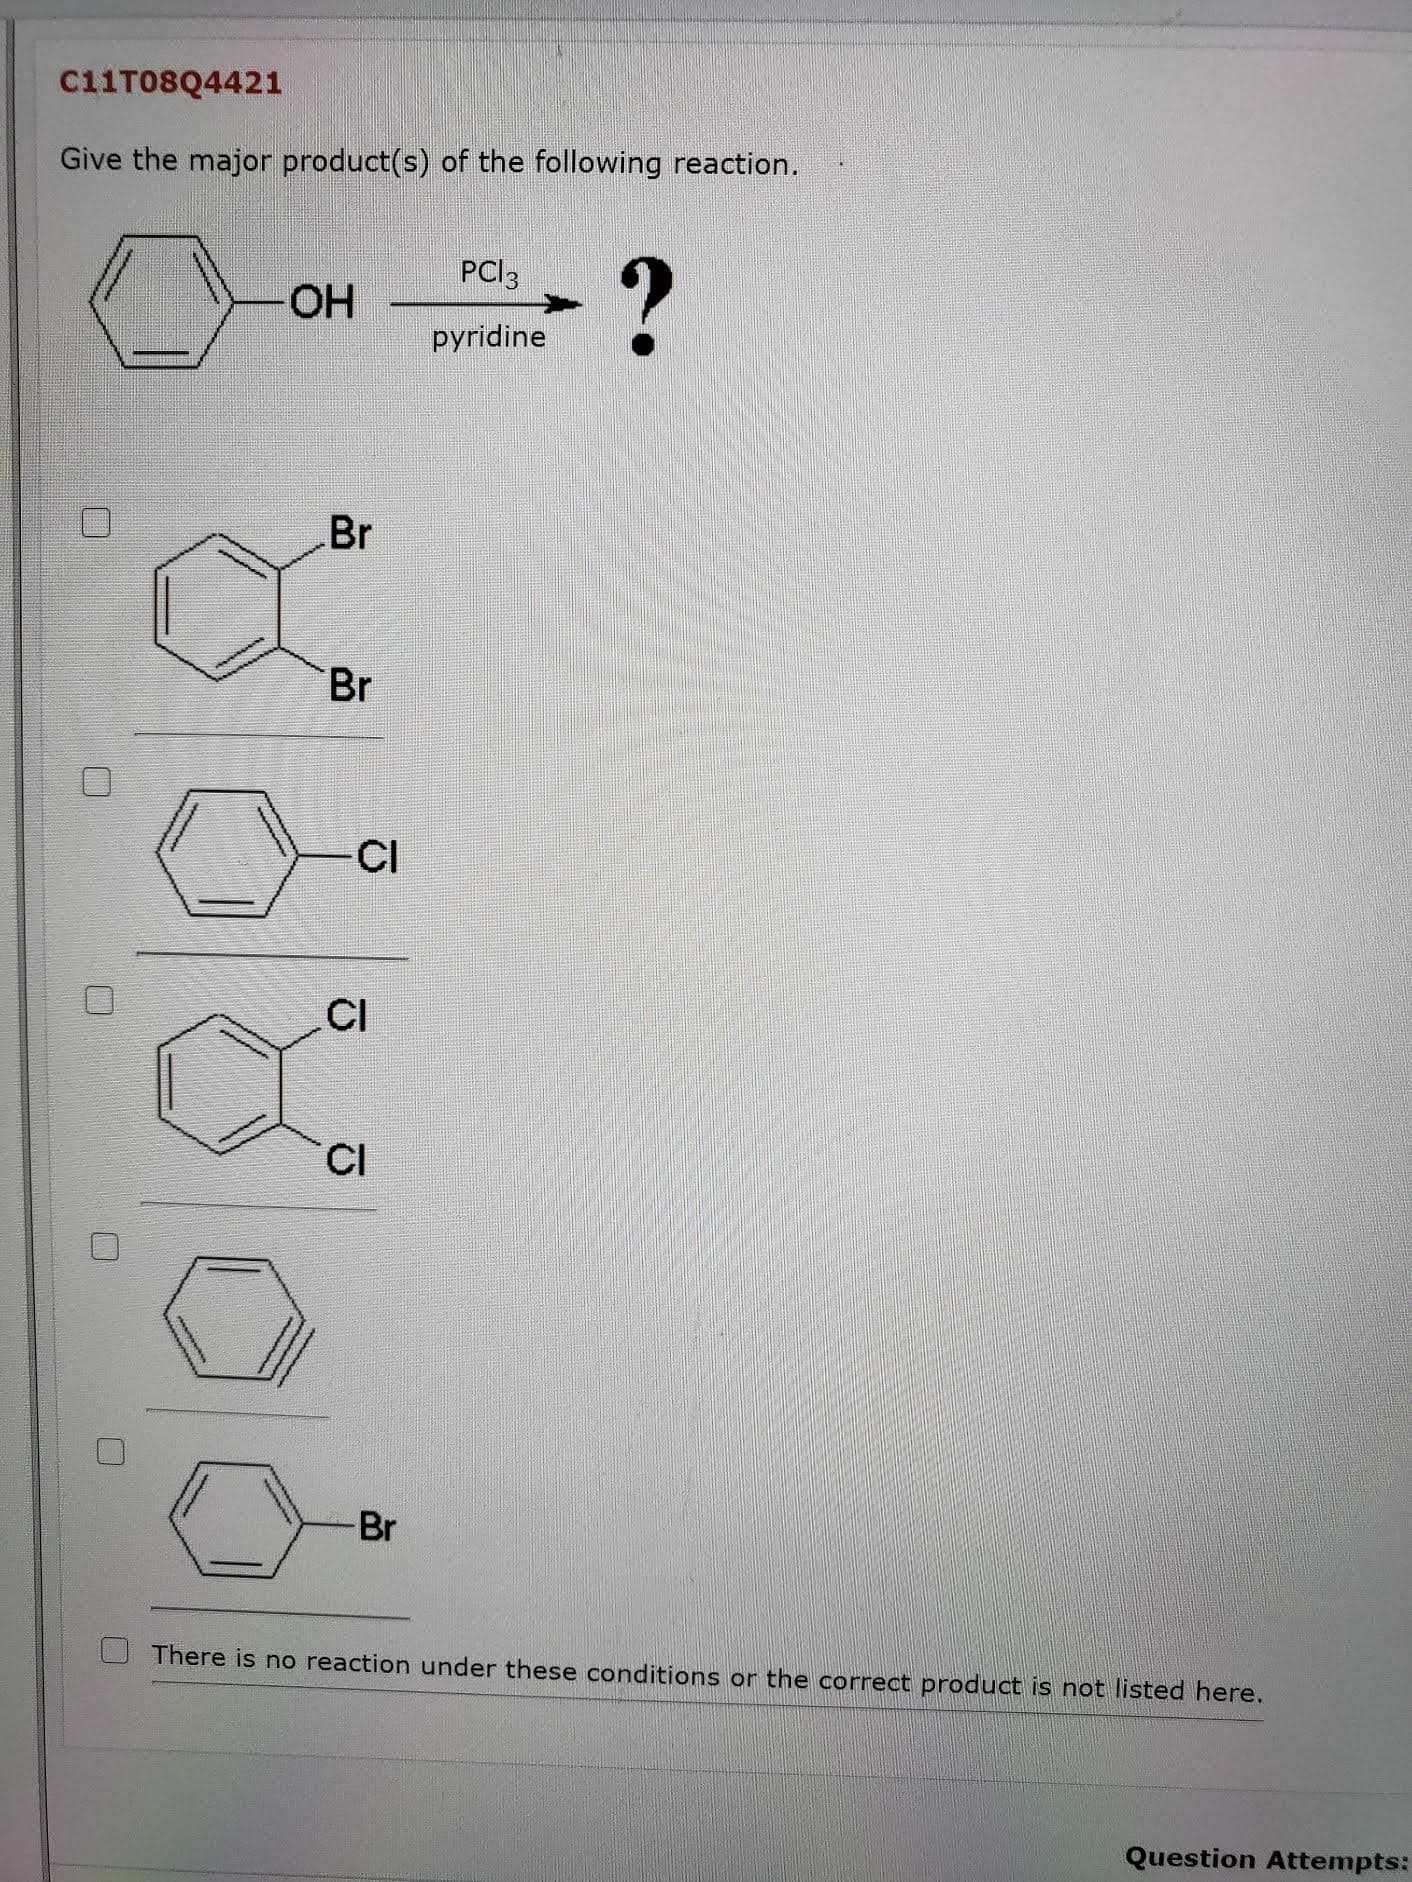 Give the major product(s) of the following reaction.
PCI3
OH
pyridine
Br
Br
CI
CI
CI
Br
There is no reaction under these conditions or the correct product is
